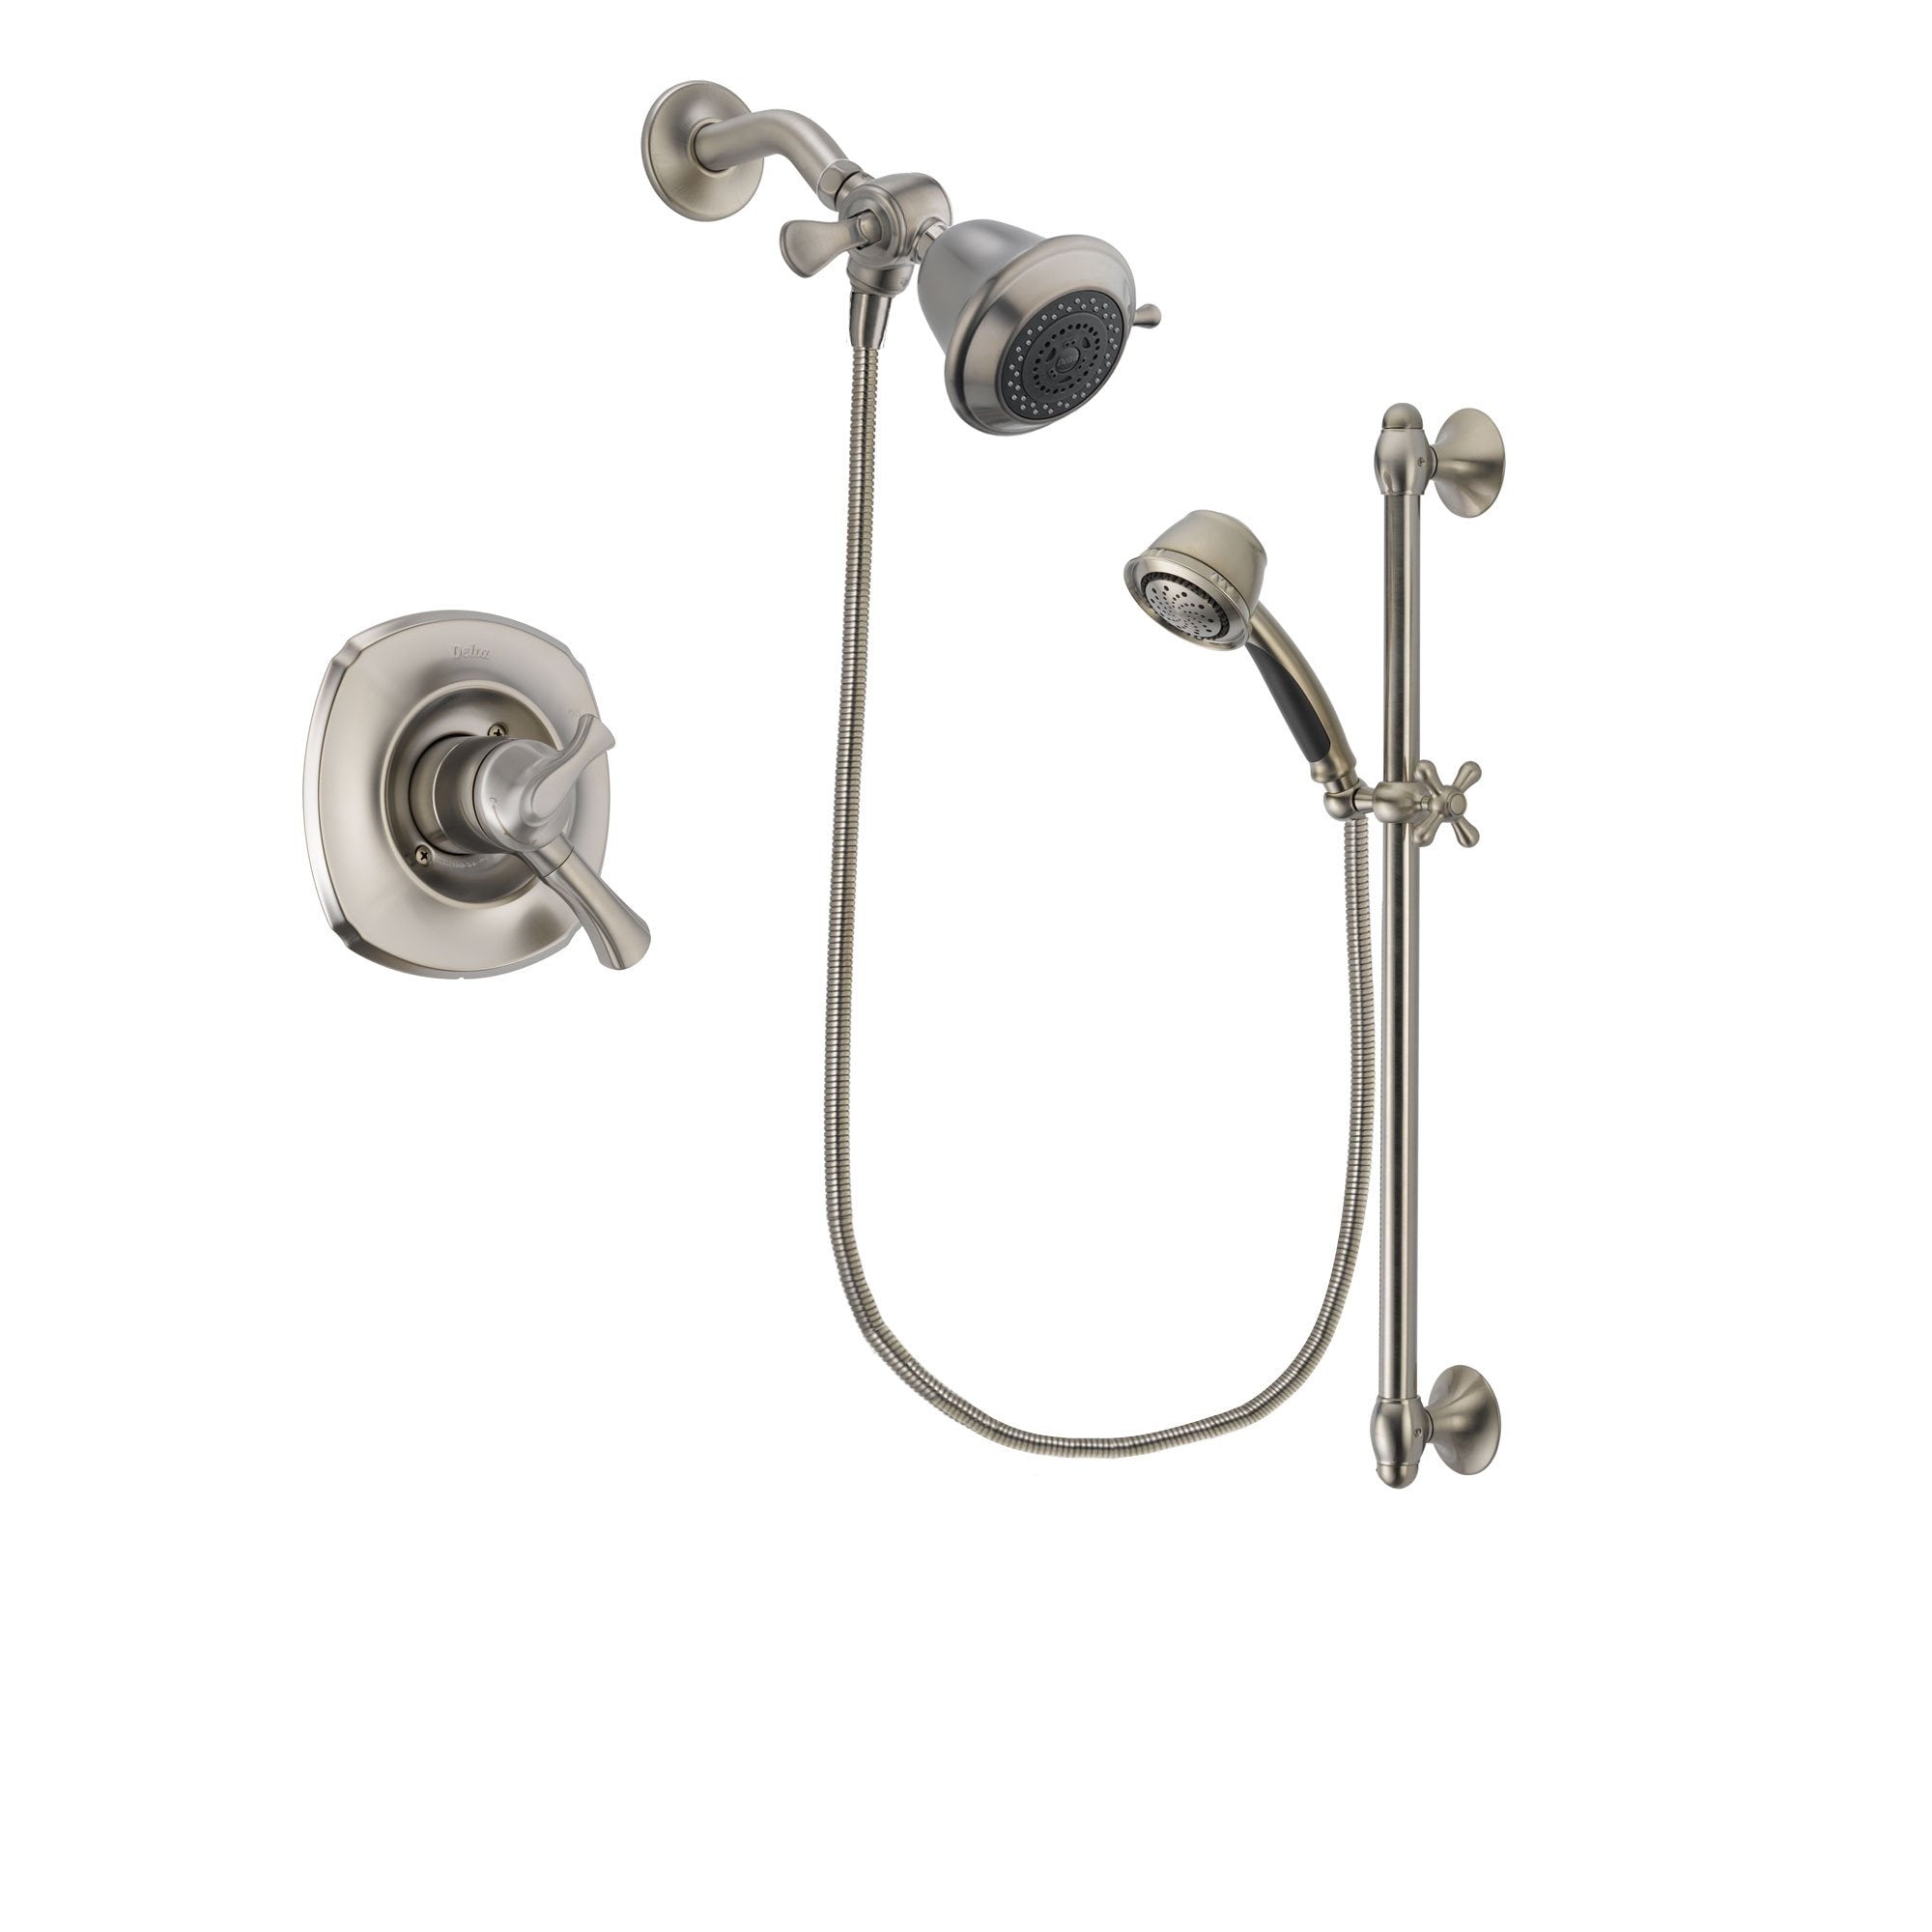 Delta Addison Stainless Steel Finish Dual Control Shower Faucet System Package with Shower Head and 5-Spray Personal Handshower with Slide Bar Includes Rough-in Valve DSP1270V